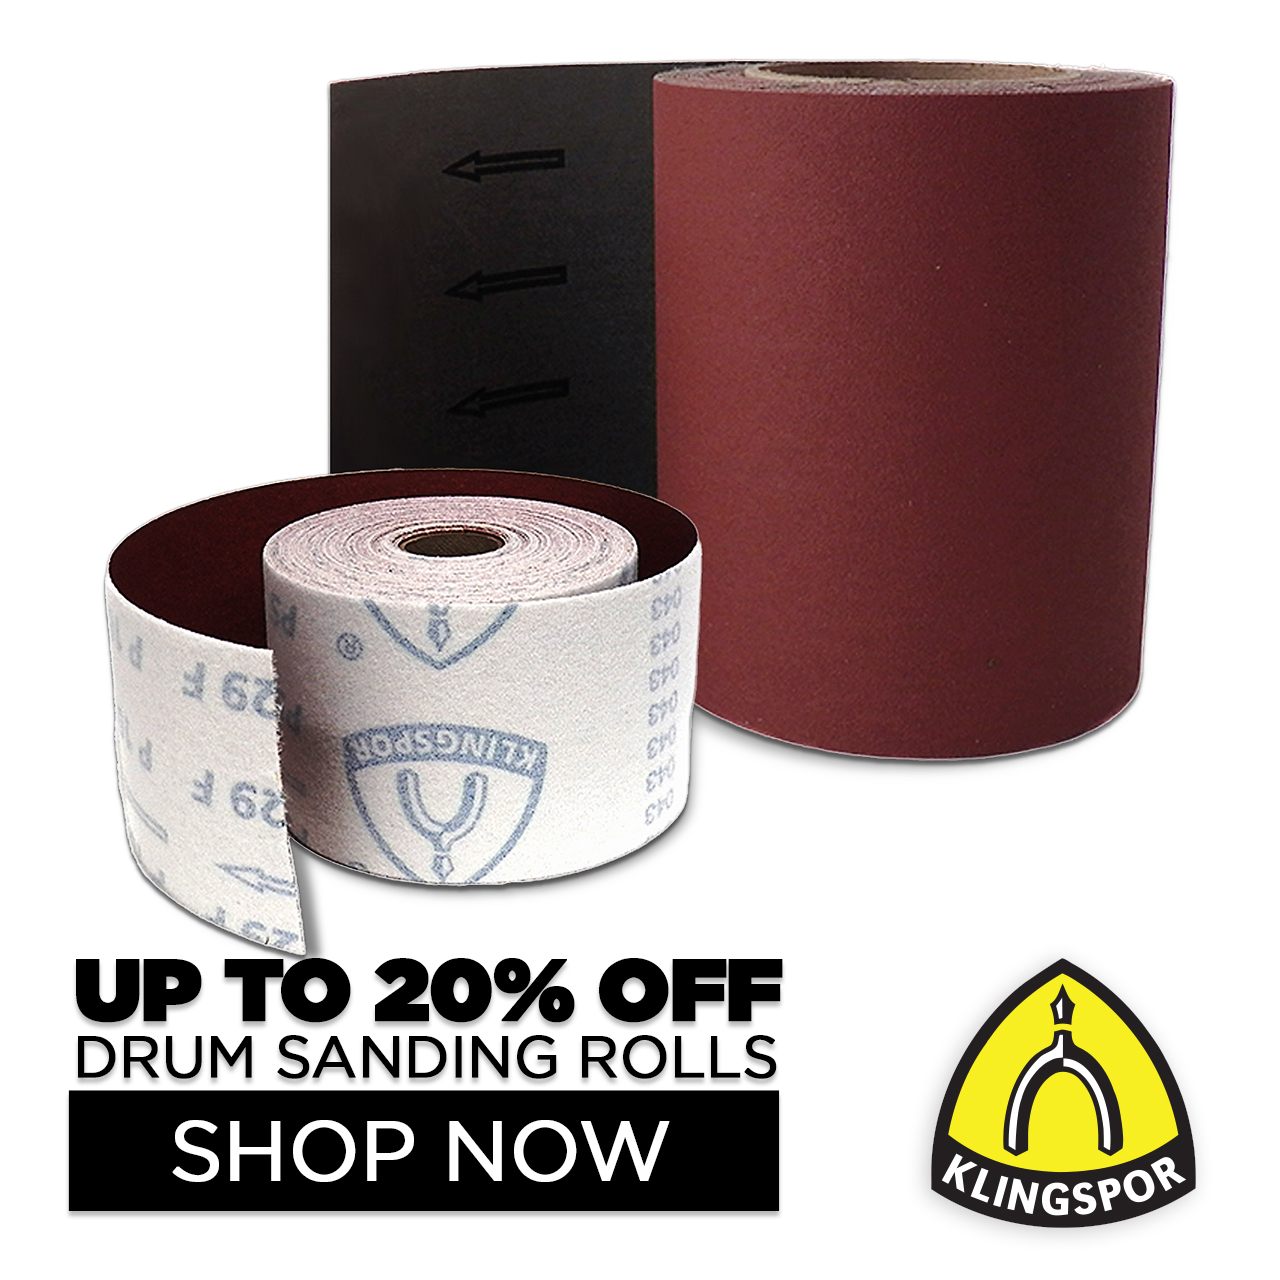 Up to 20% Off on Drum Sanding Rolls